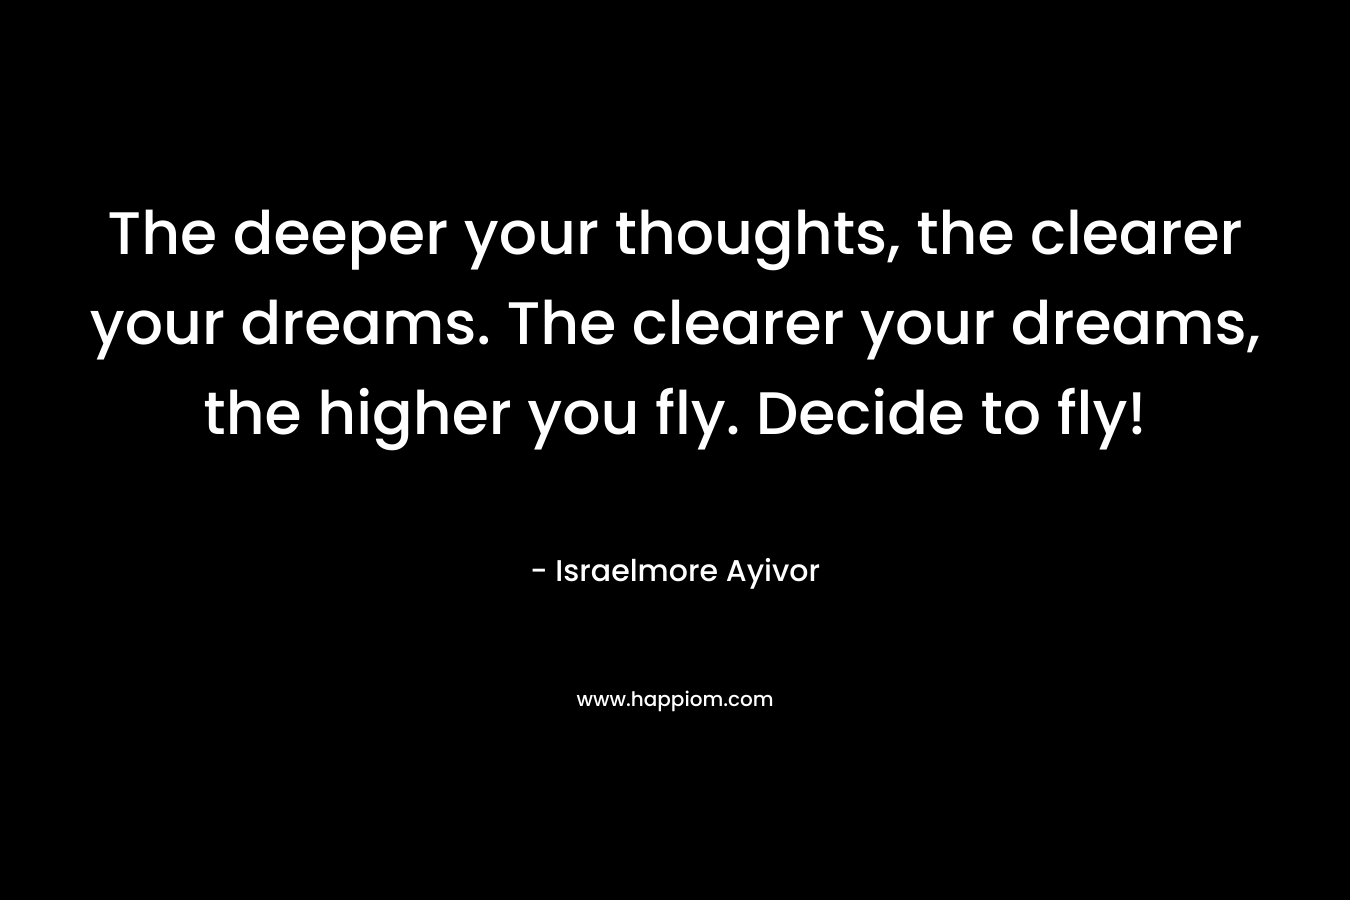 The deeper your thoughts, the clearer your dreams. The clearer your dreams, the higher you fly. Decide to fly!